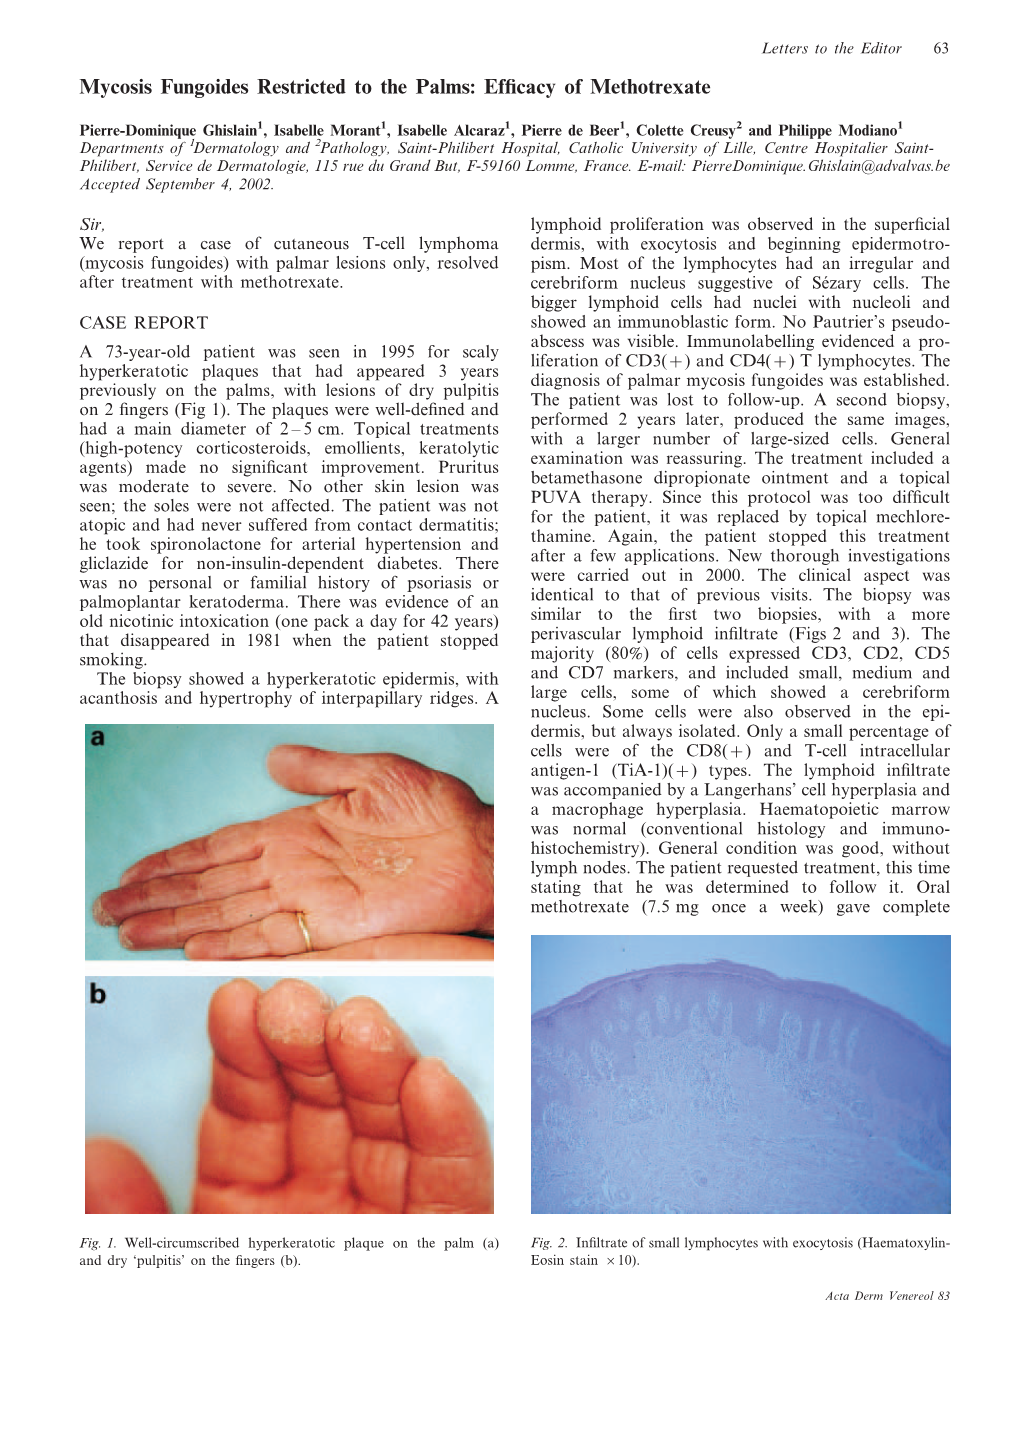 Mycosis Fungoides Restricted to the Palms: Efficacy of Methotrexate